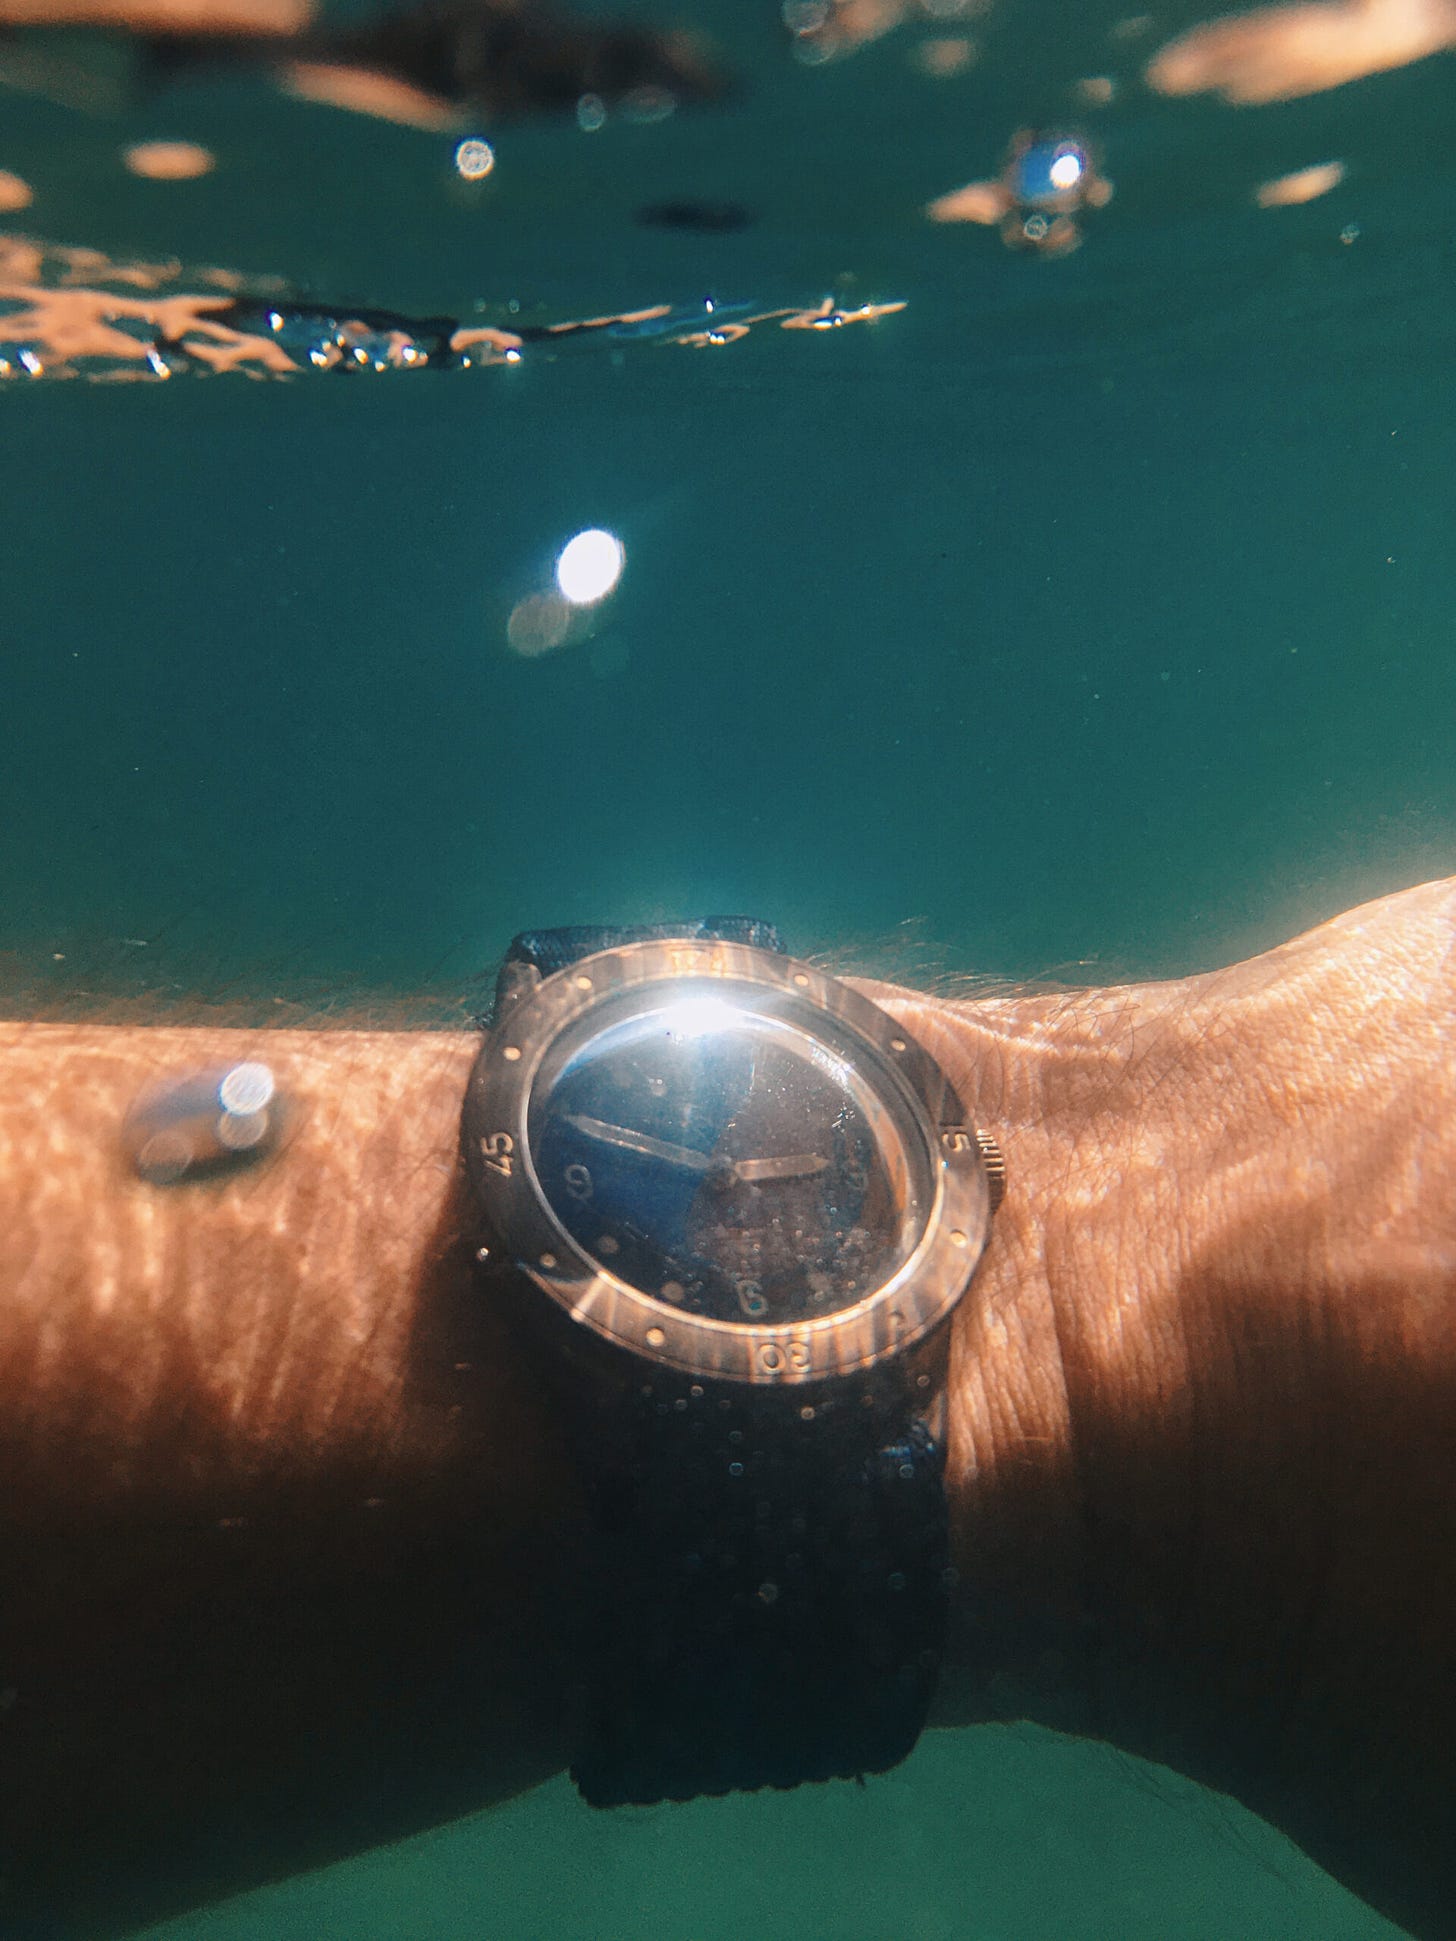 Baltic Aquascaphe Bronze on wrist underwater shot, with two bubbles in foreground and the surface of the water close above